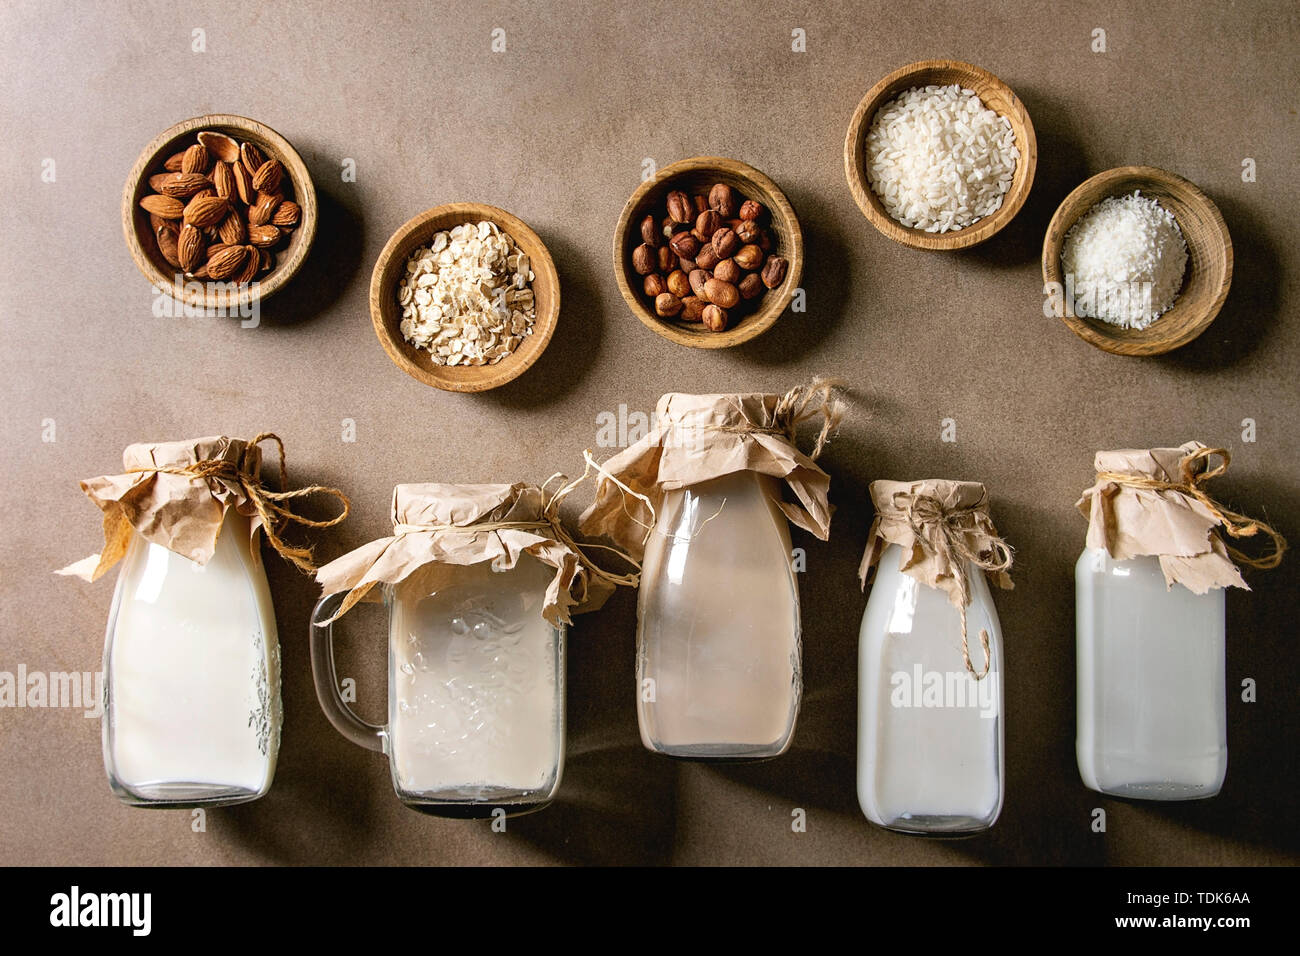 Variety of non-dairy vegan lactose free nuts and grain milk almond, hazelnut, coconut, rice, oat in glass bottles in row with ingredients above over b Stock Photo